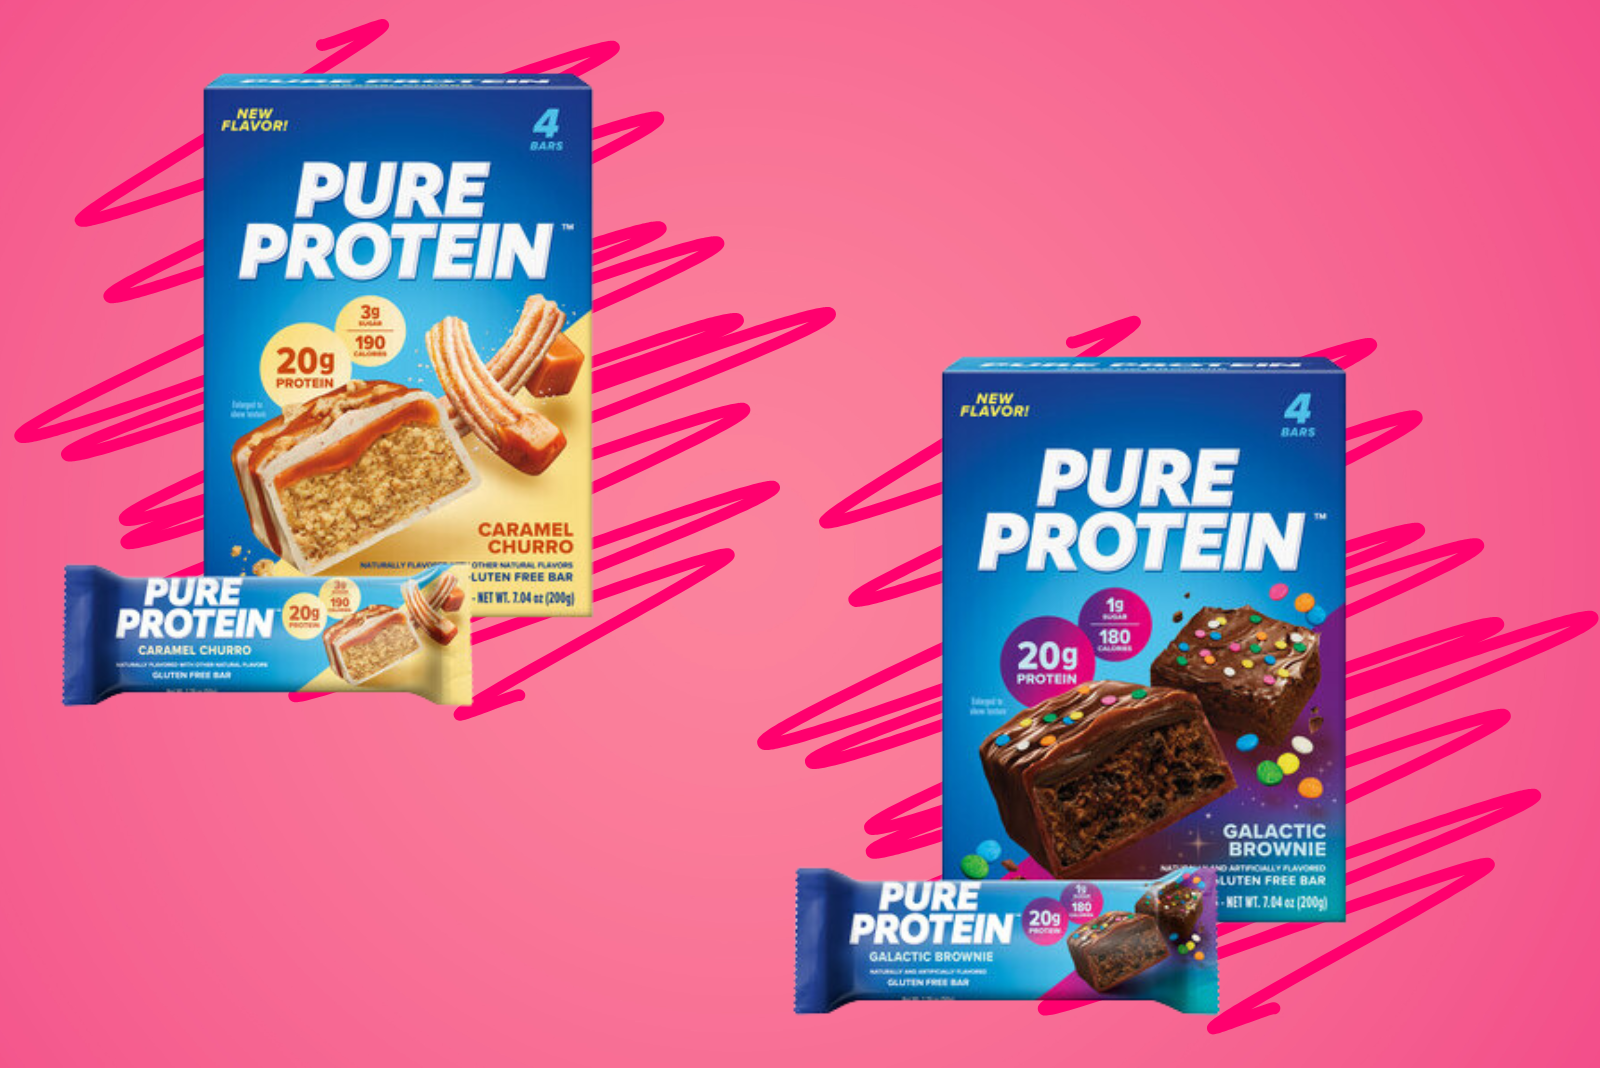 Bloom Nutrition makes snacking category debut with limited-edition protein  bars